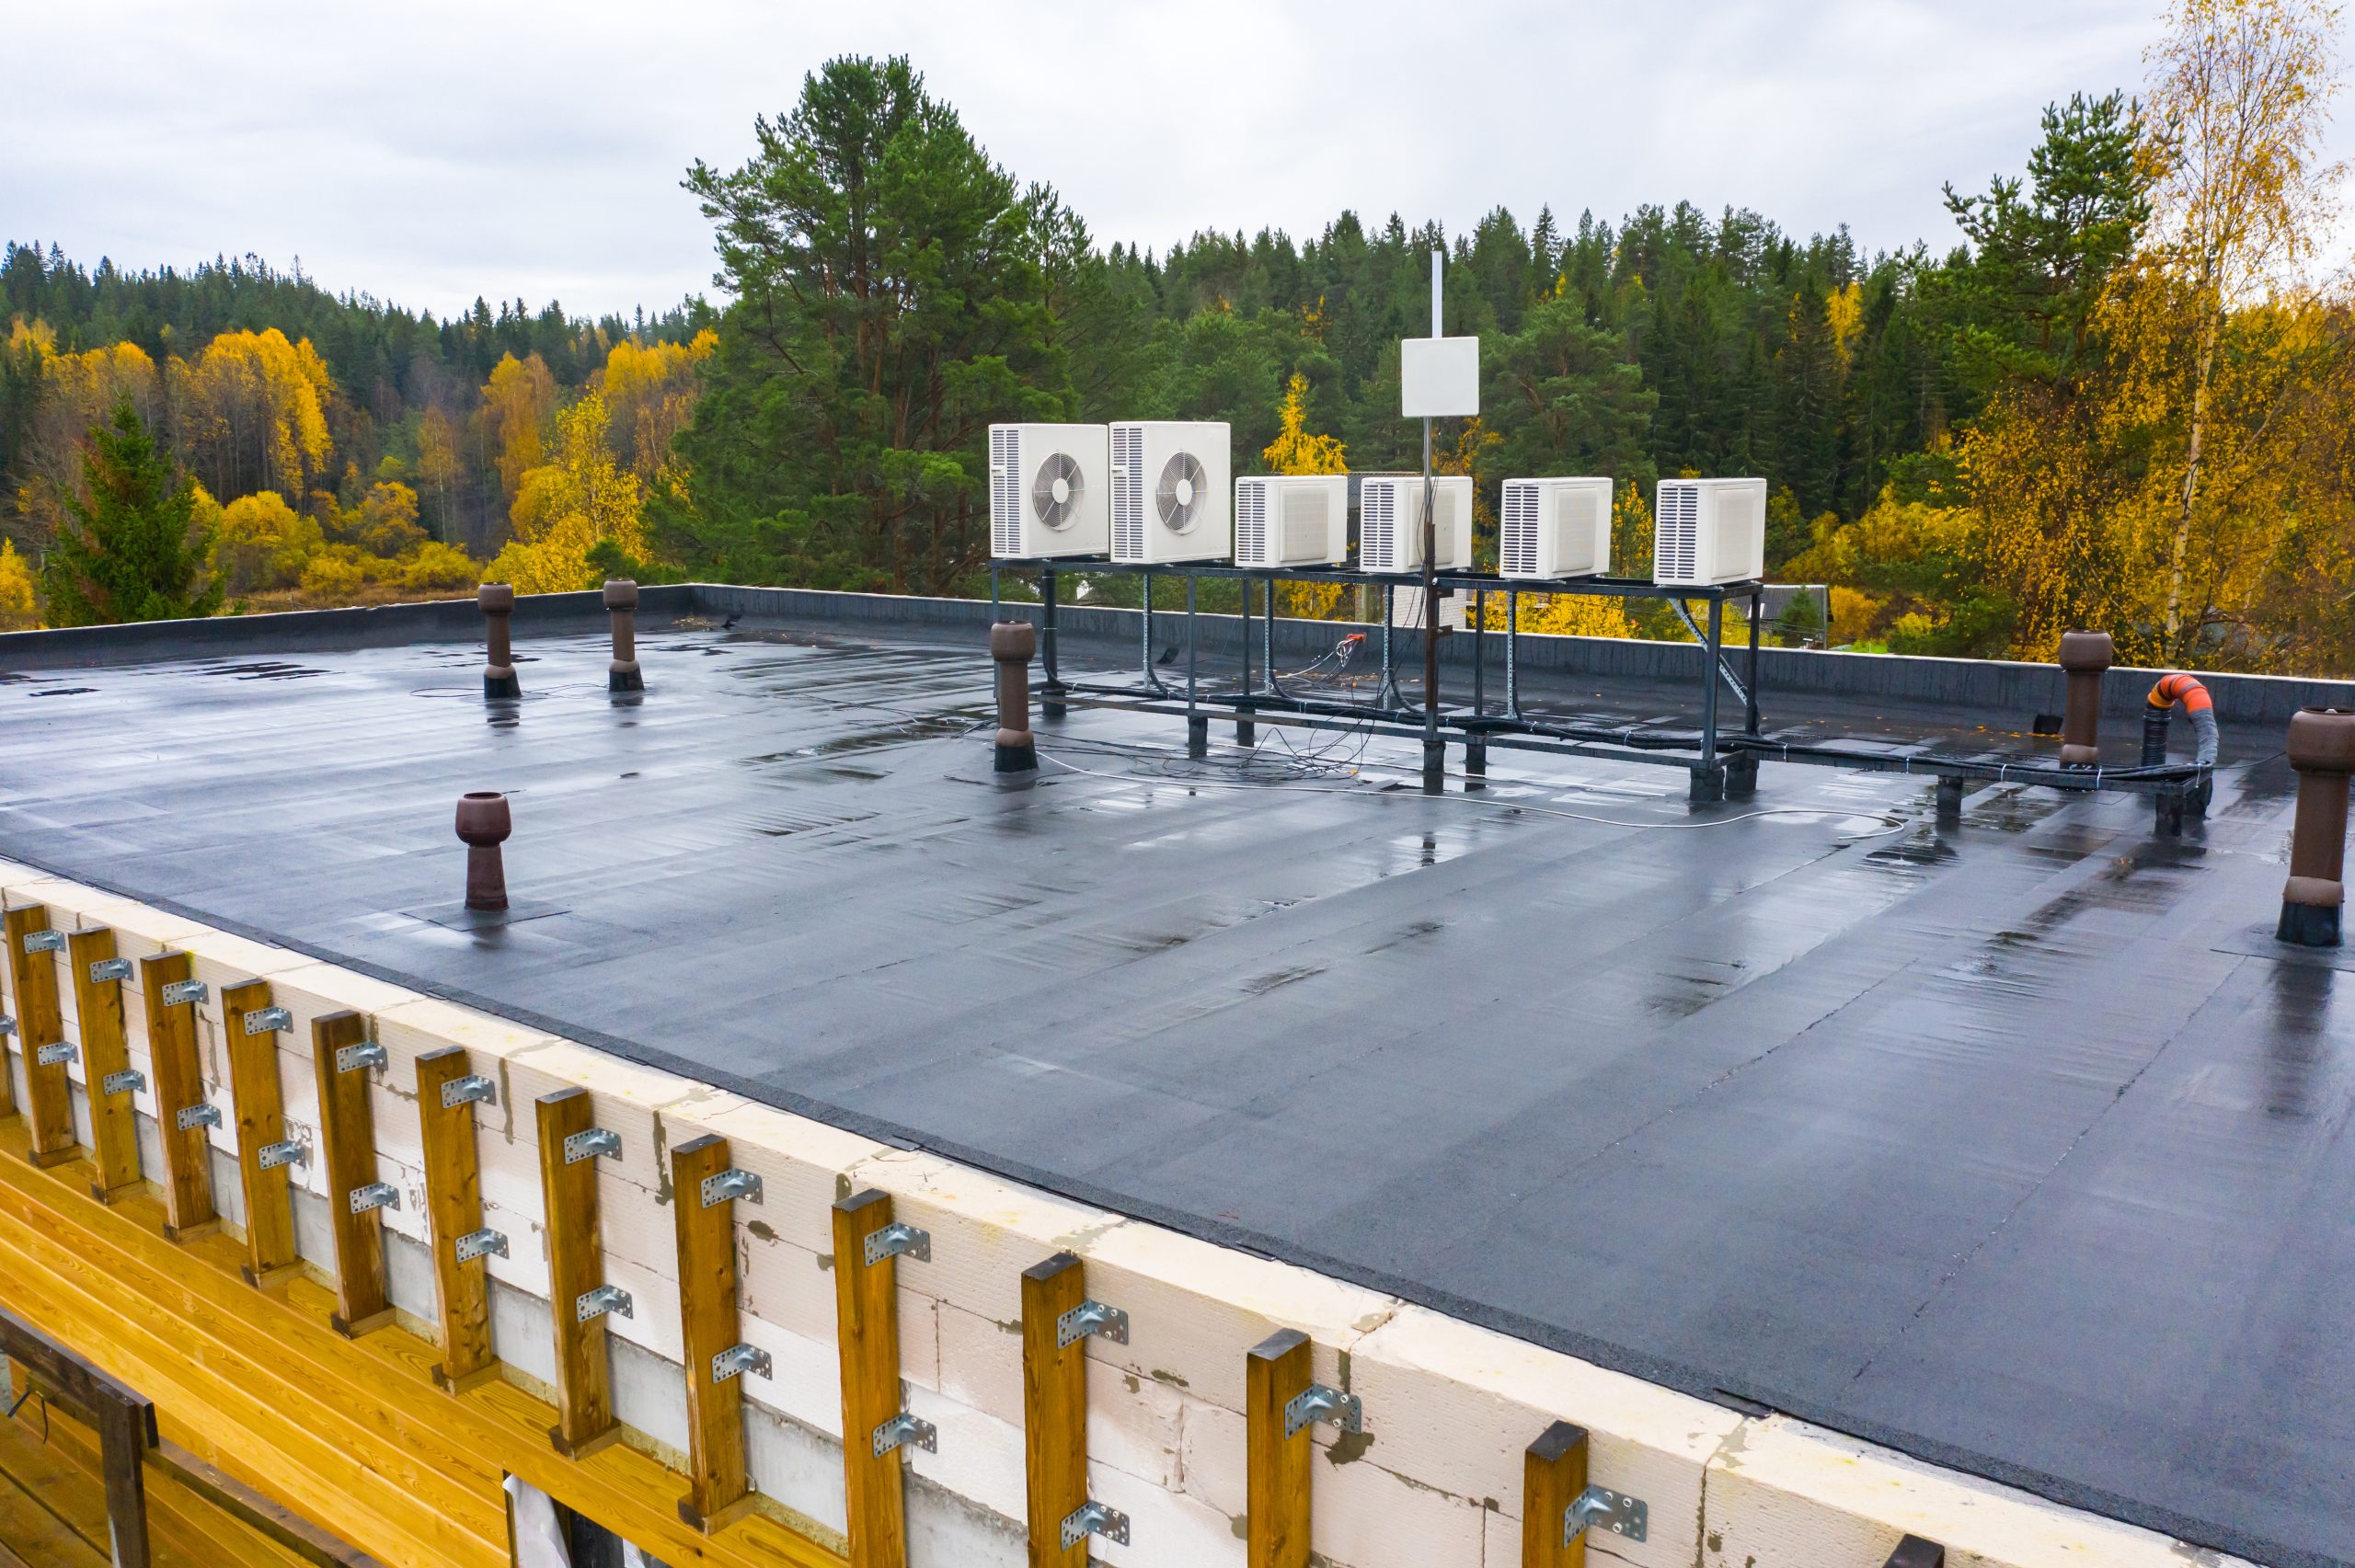 The dark flat roof of the warehouse with coniferous forest in the background